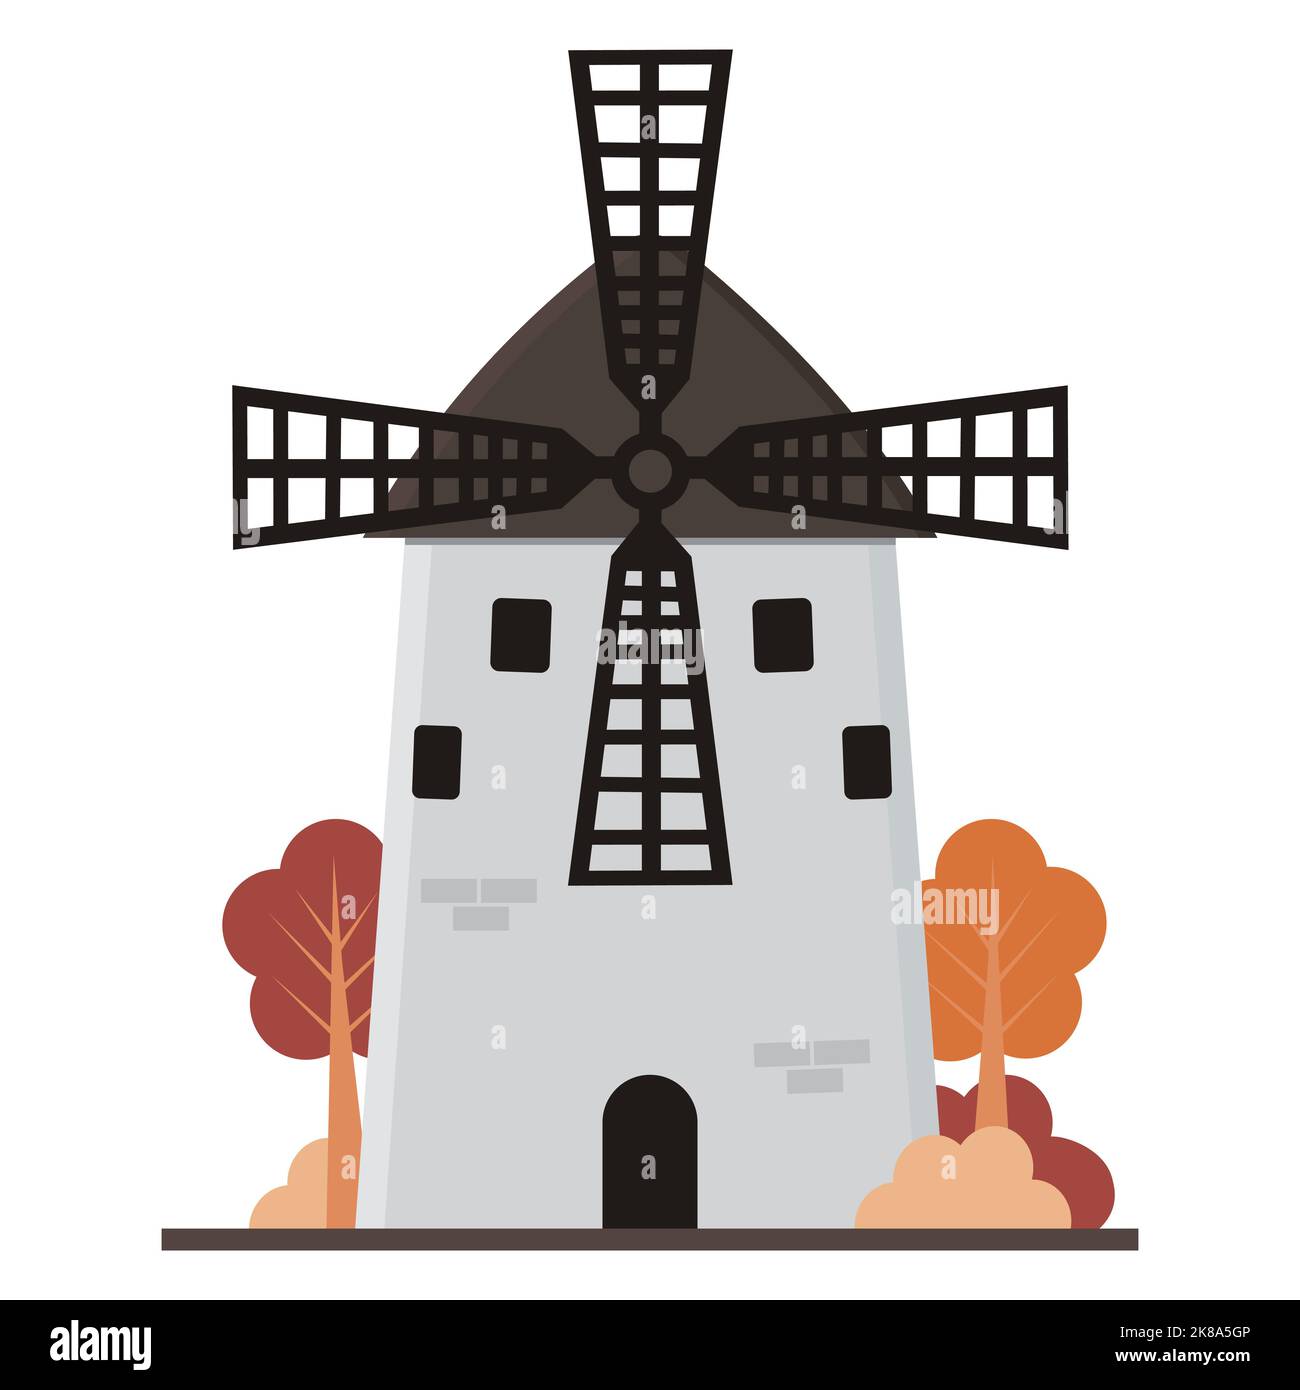 Windmill in cartoon style, vector isolated illustration on a white background Stock Vector